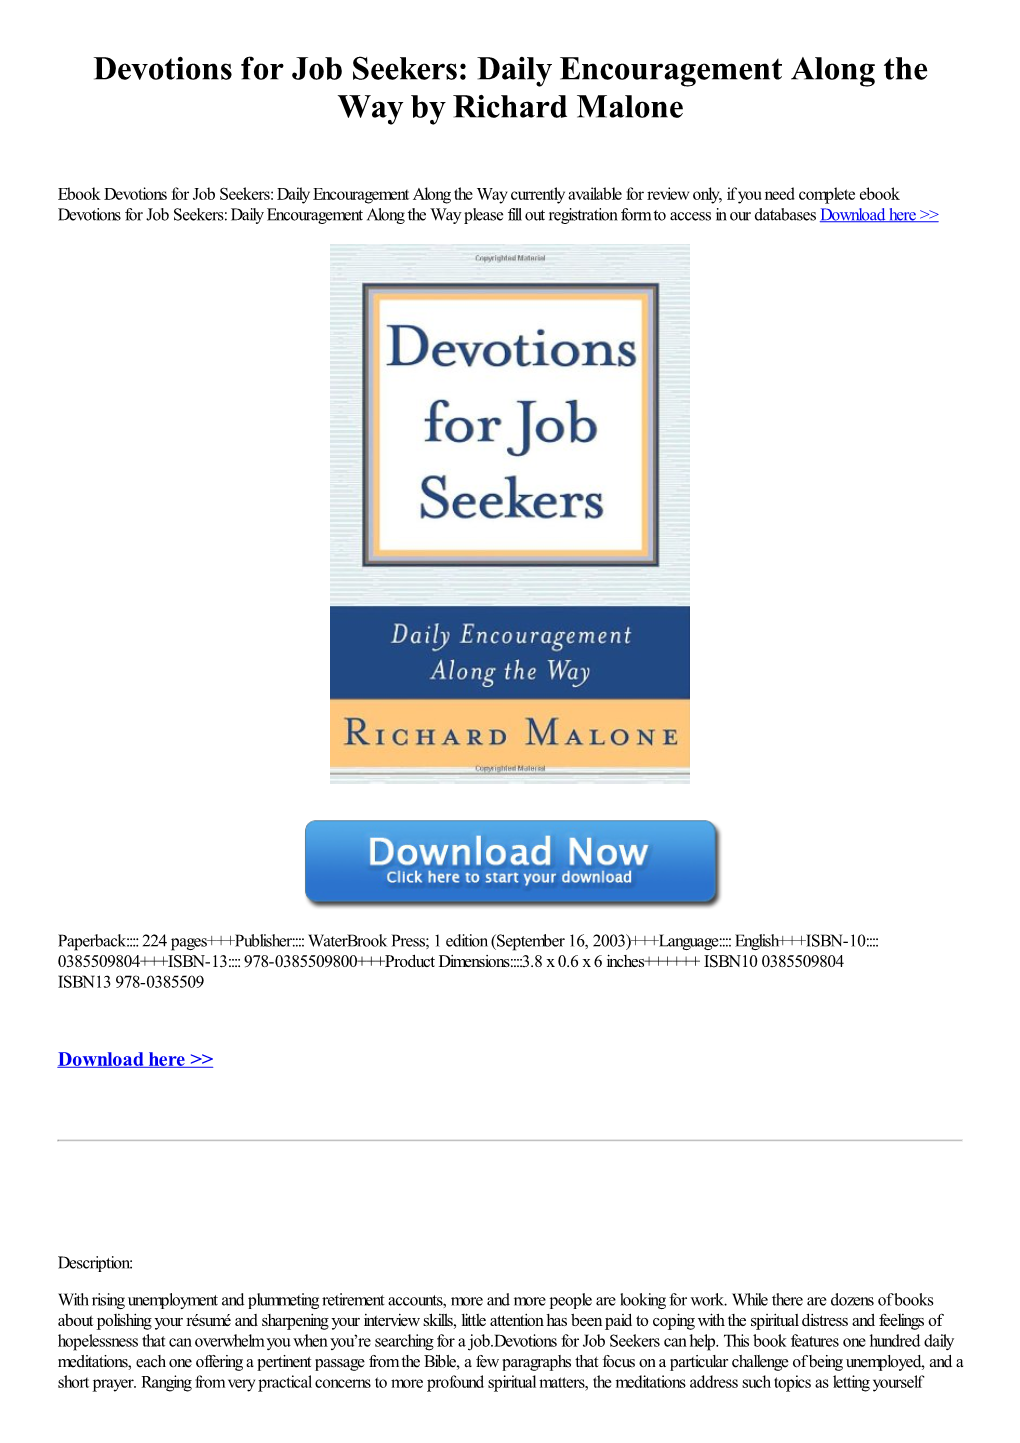 Devotions for Job Seekers: Daily Encouragement Along the Way by Richard Malone